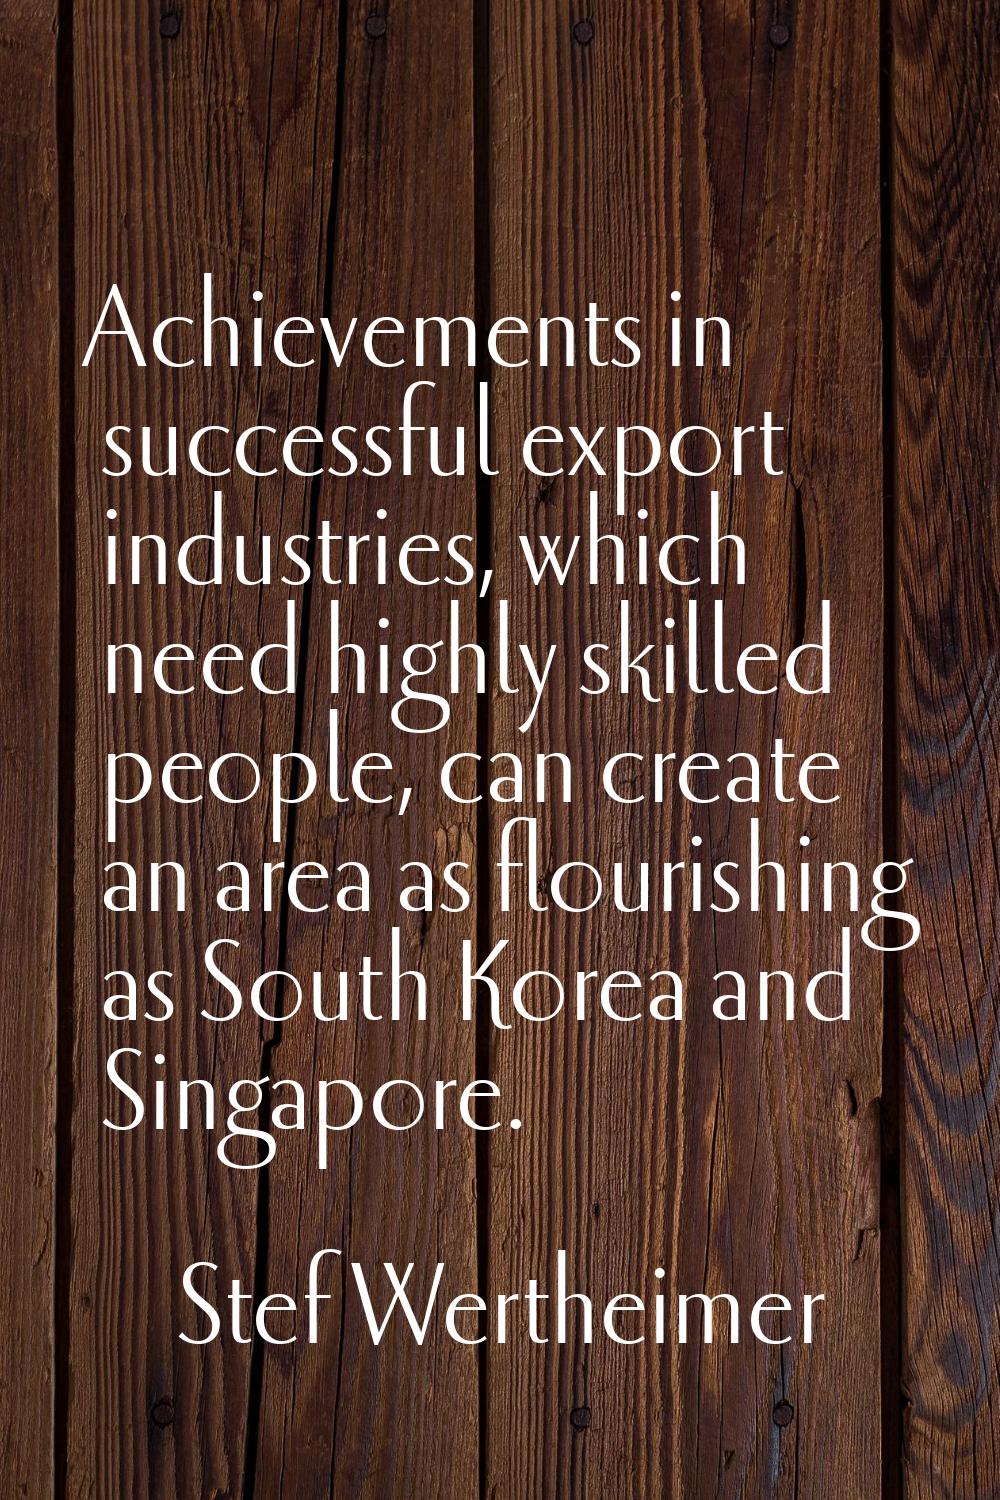 Achievements in successful export industries, which need highly skilled people, can create an area 